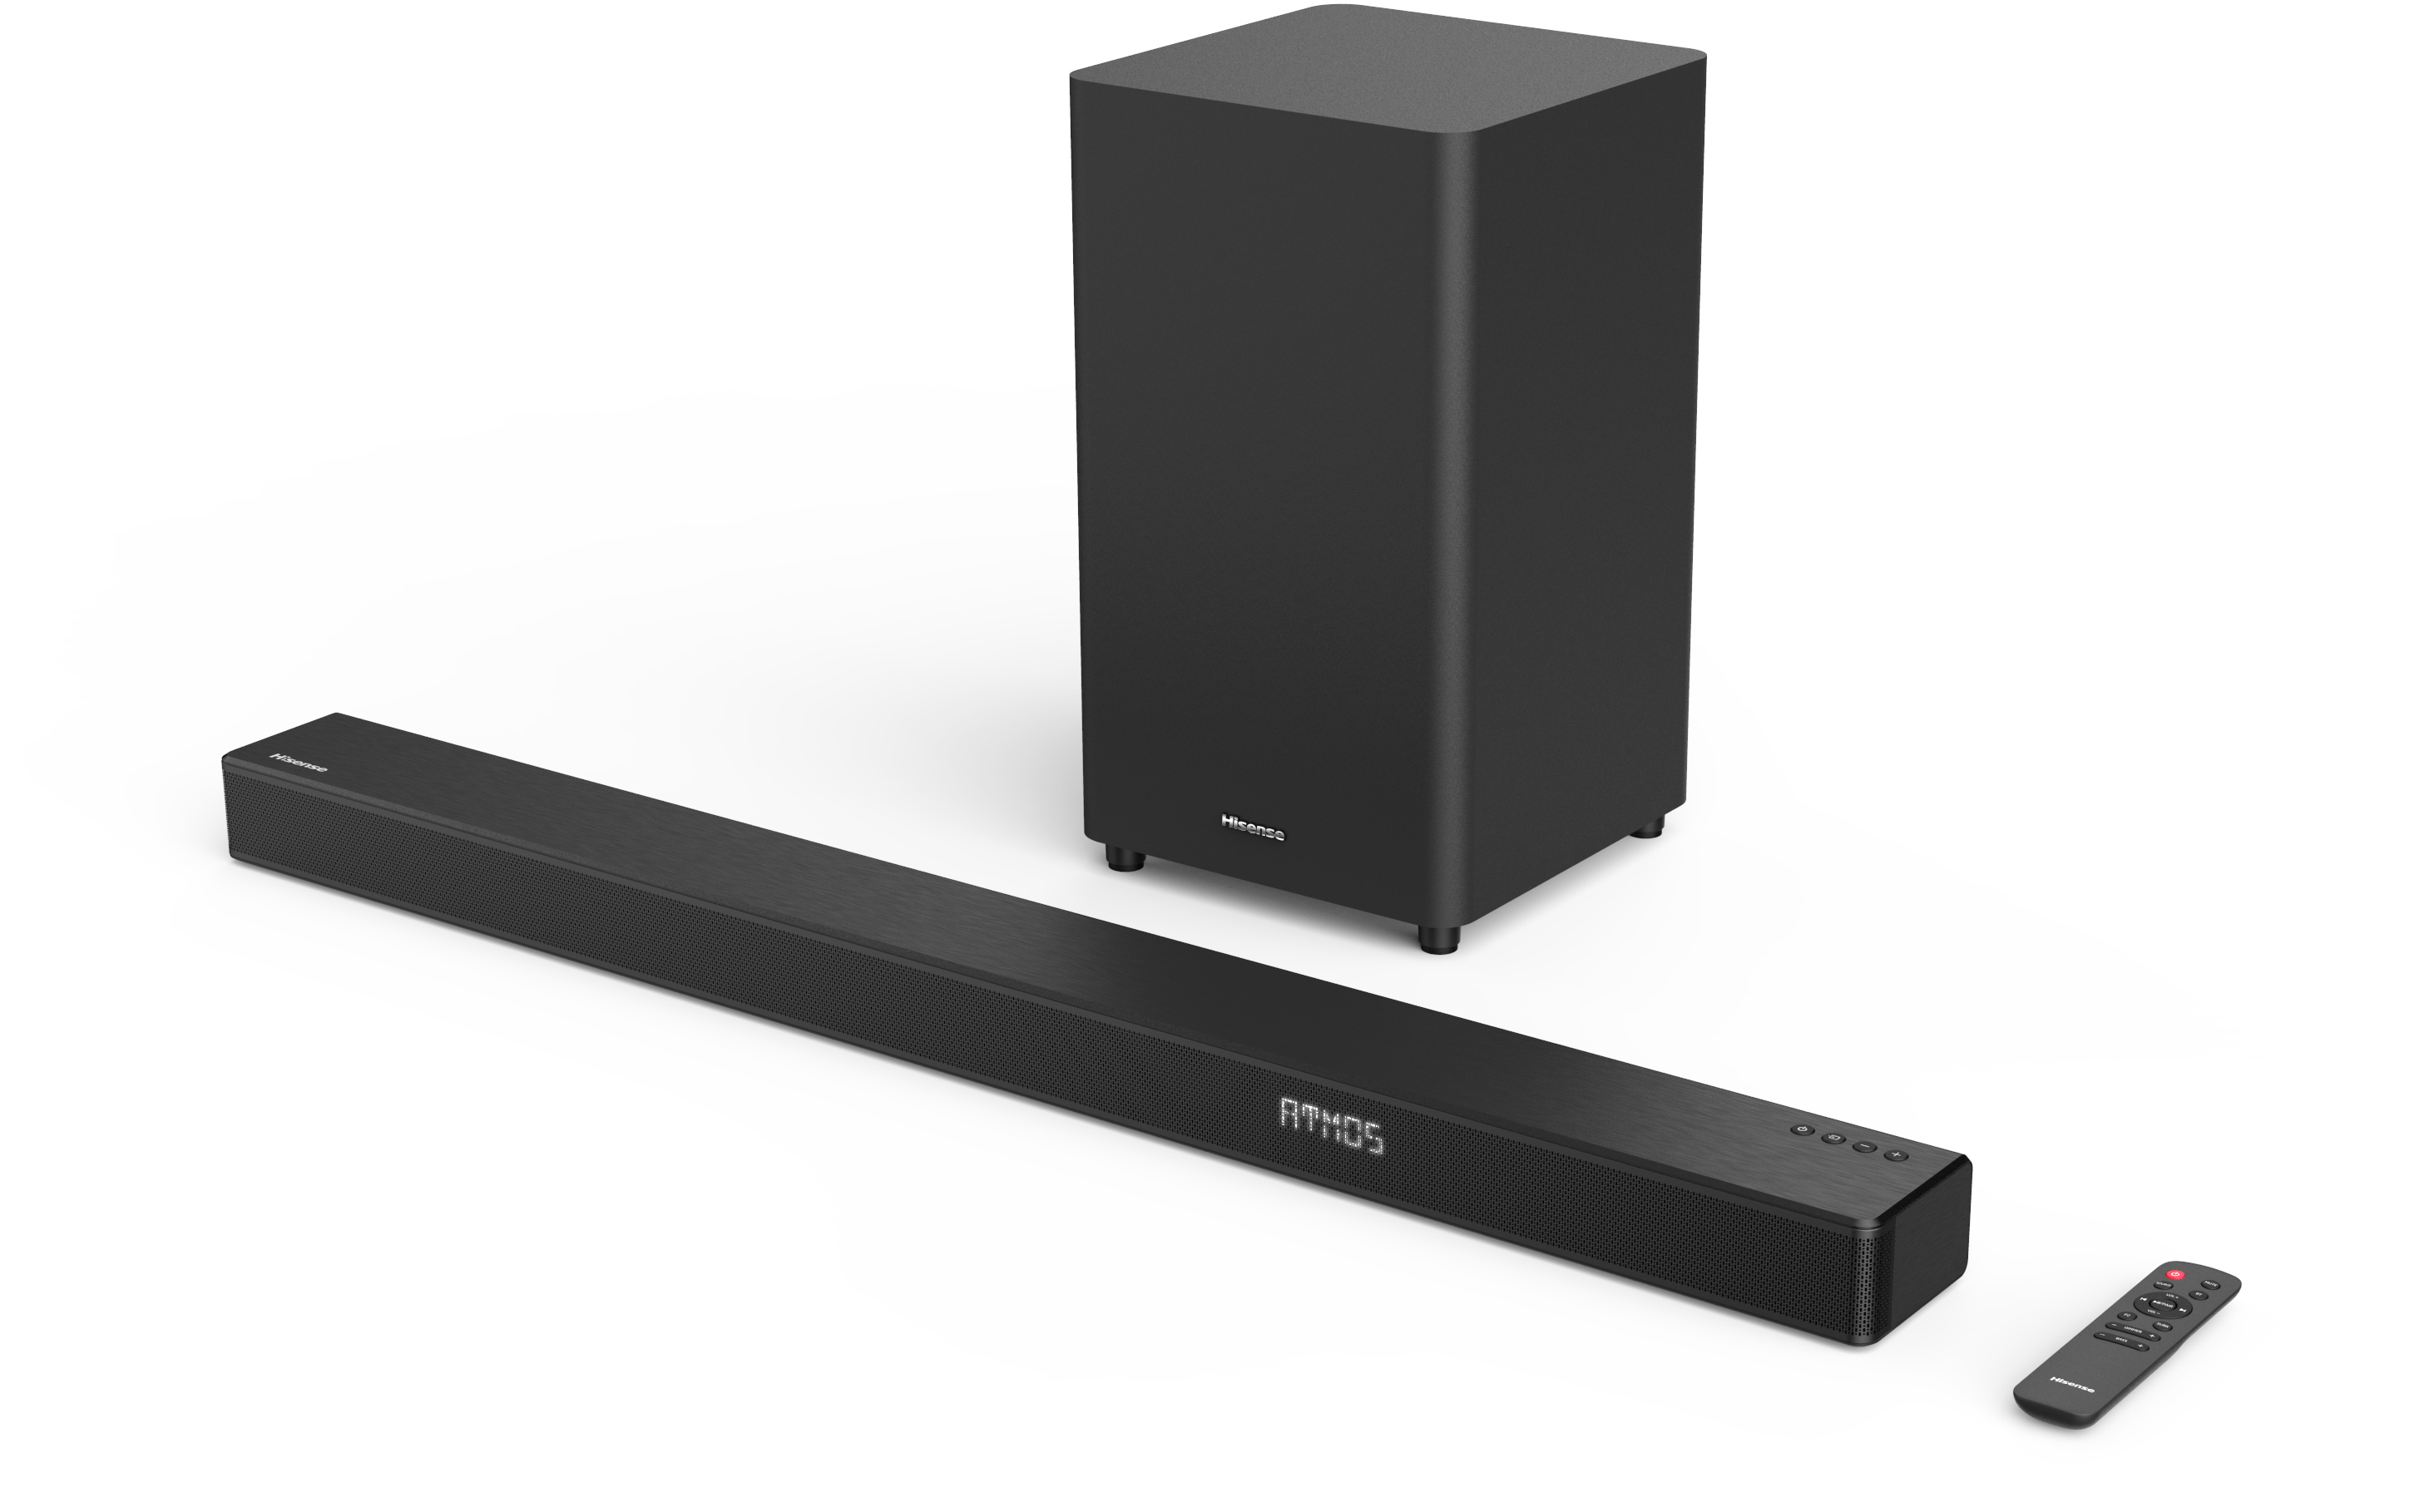 Hisense HS312 3.1ch Sound Bar with Wireless Subwoofer, 300W, Dolby Atmos, 4K Pass-Through, Cinematic Experience, One Remote Contorl, Bluetooth, HDMI ARC/Optical/AUX/USB (Model HS312) Black - image 4 of 22